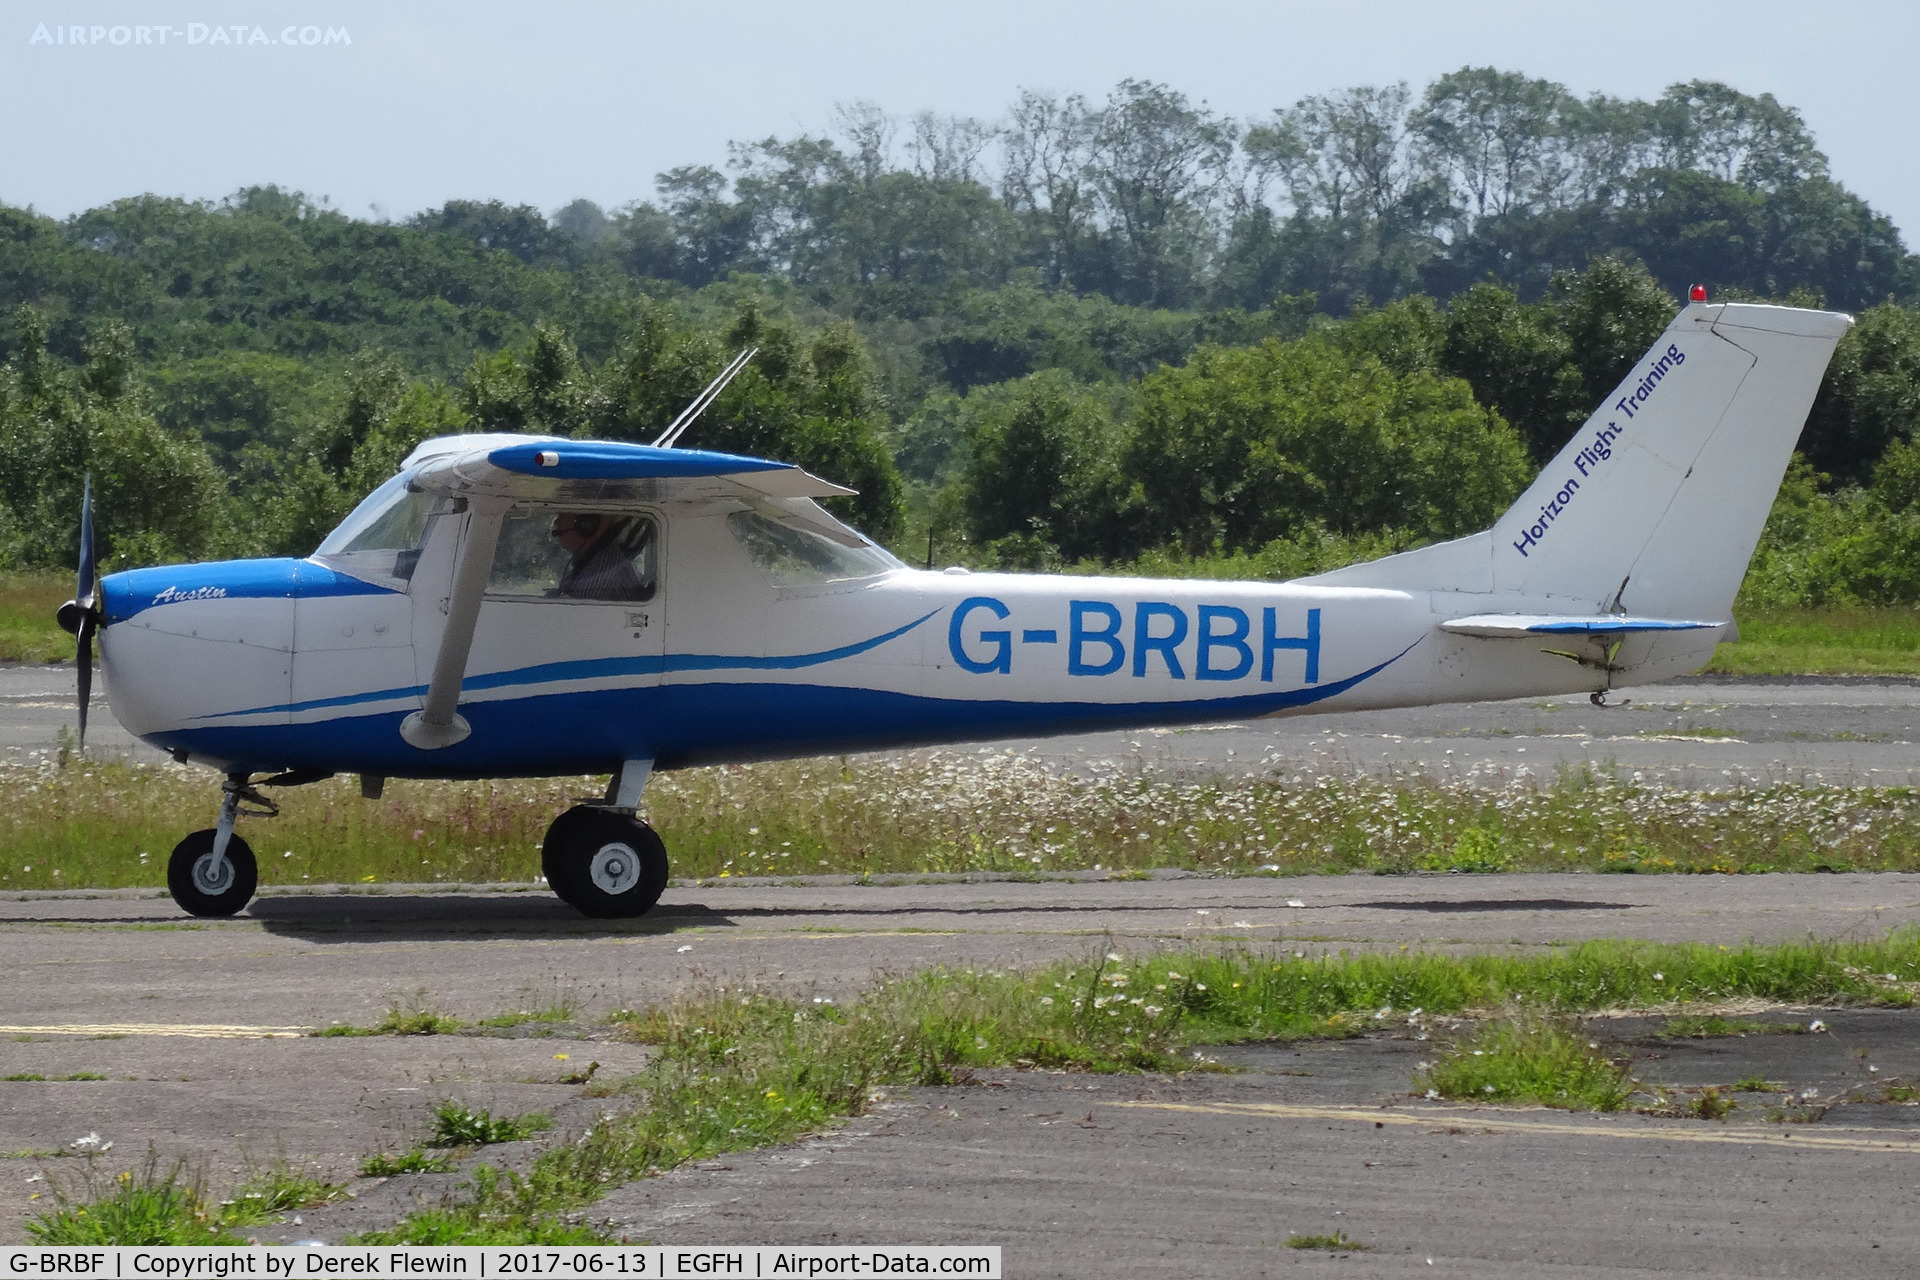 G-BRBF, 1978 Cessna 152 C/N 152-81993, 152, horizon Flight Training, St Athan Vale of Glamorgan based. Previously N50410, seen taxxing in.